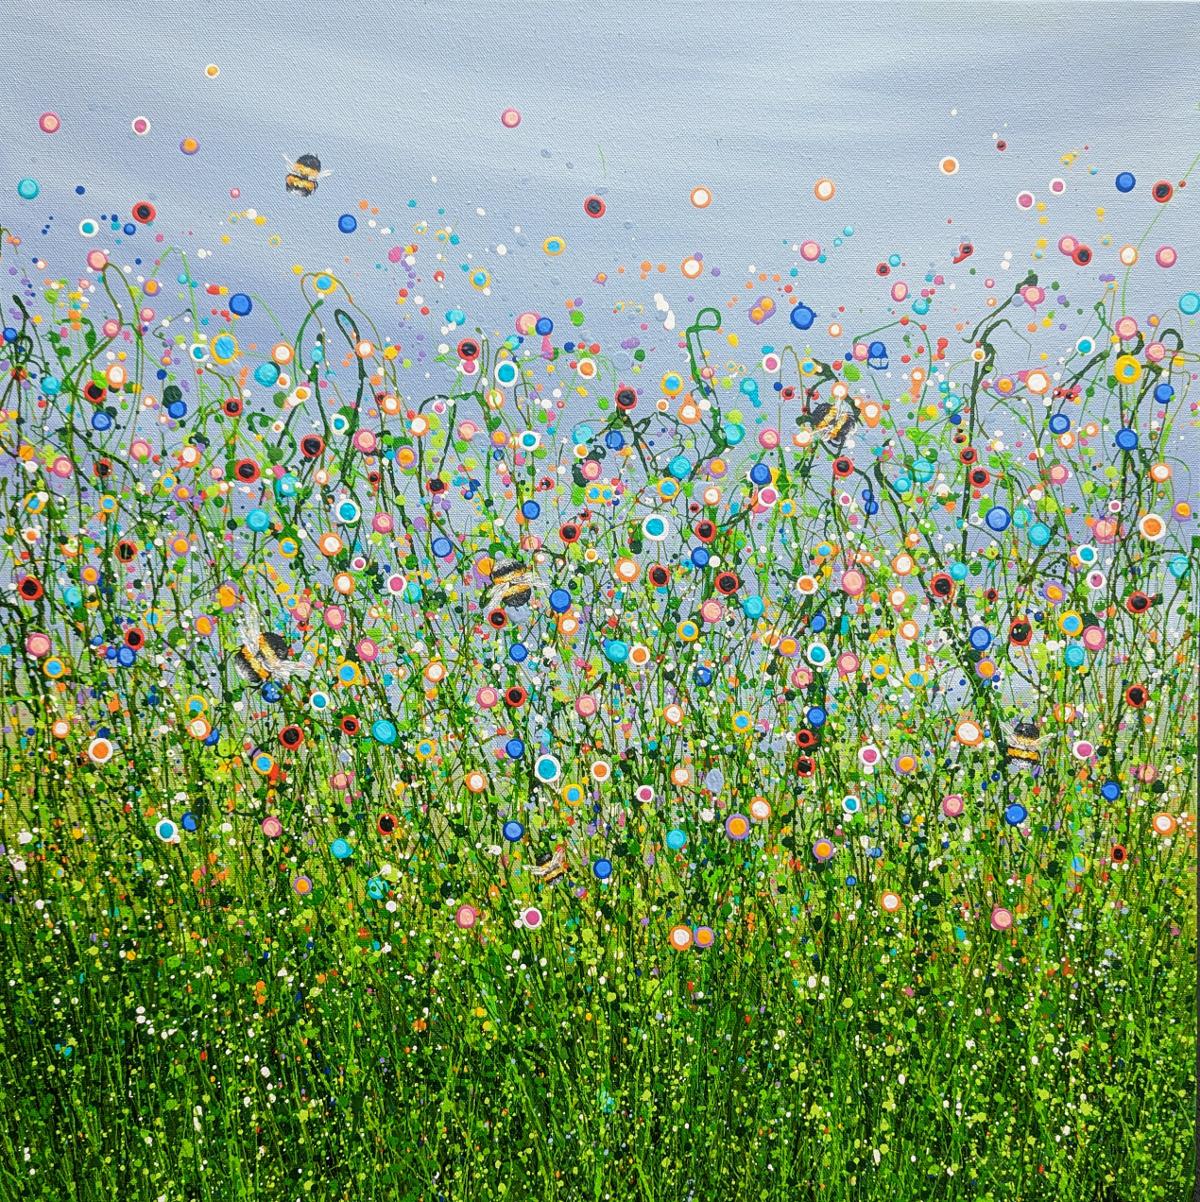 Lucy Moore Landscape Painting - Bumbling Chaos #2, floral art, meadow art, original art, affordable art